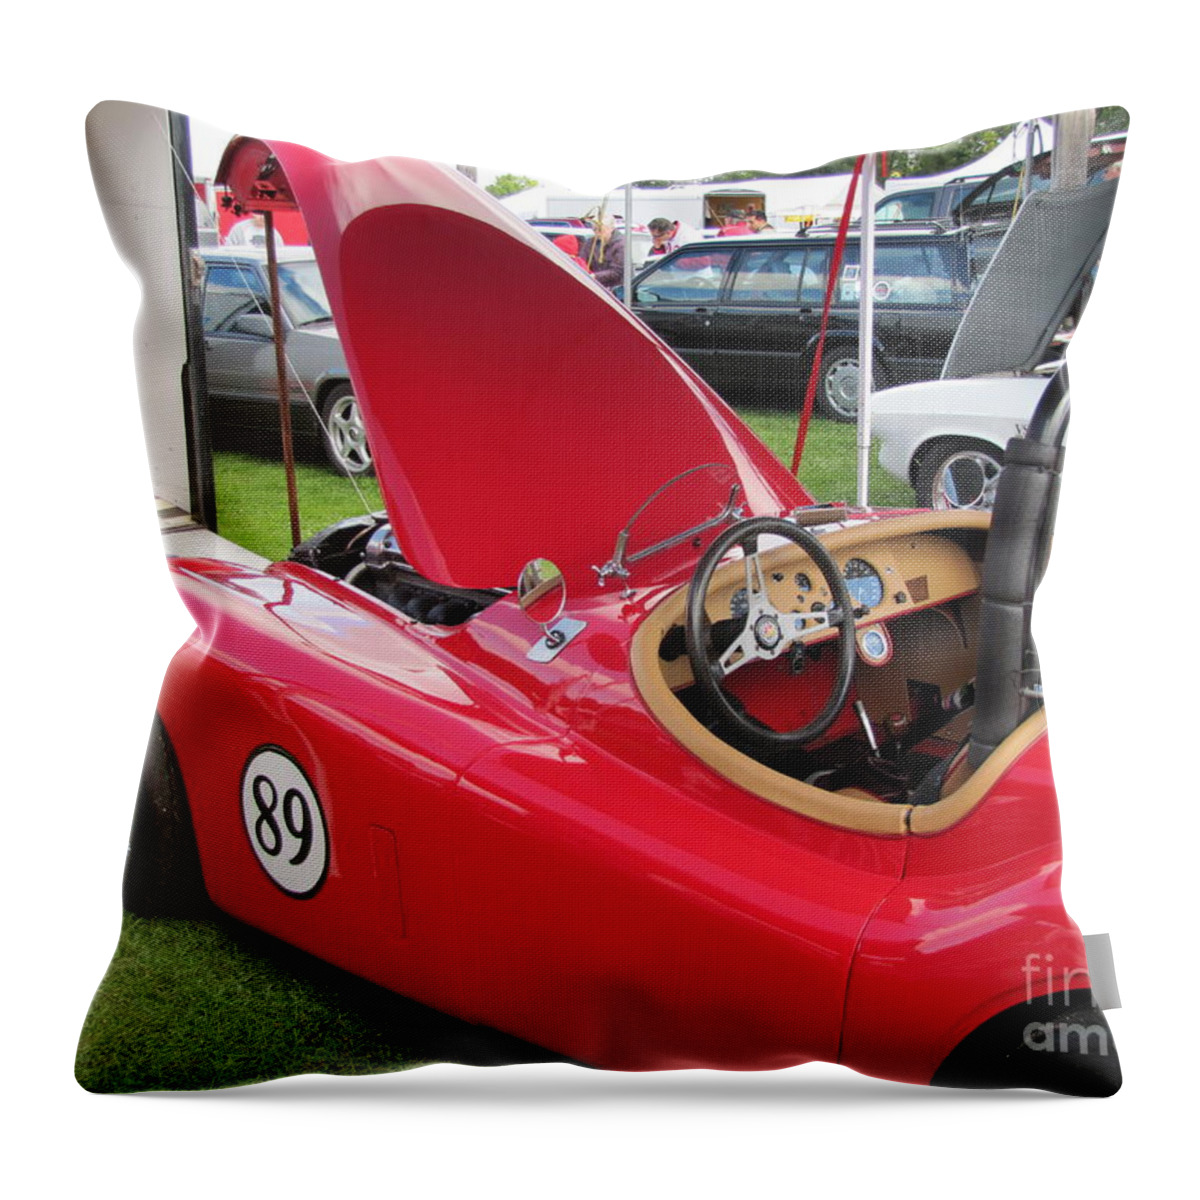 Racing.racer Throw Pillow featuring the photograph Jaguar In Paddock by Neil Zimmerman